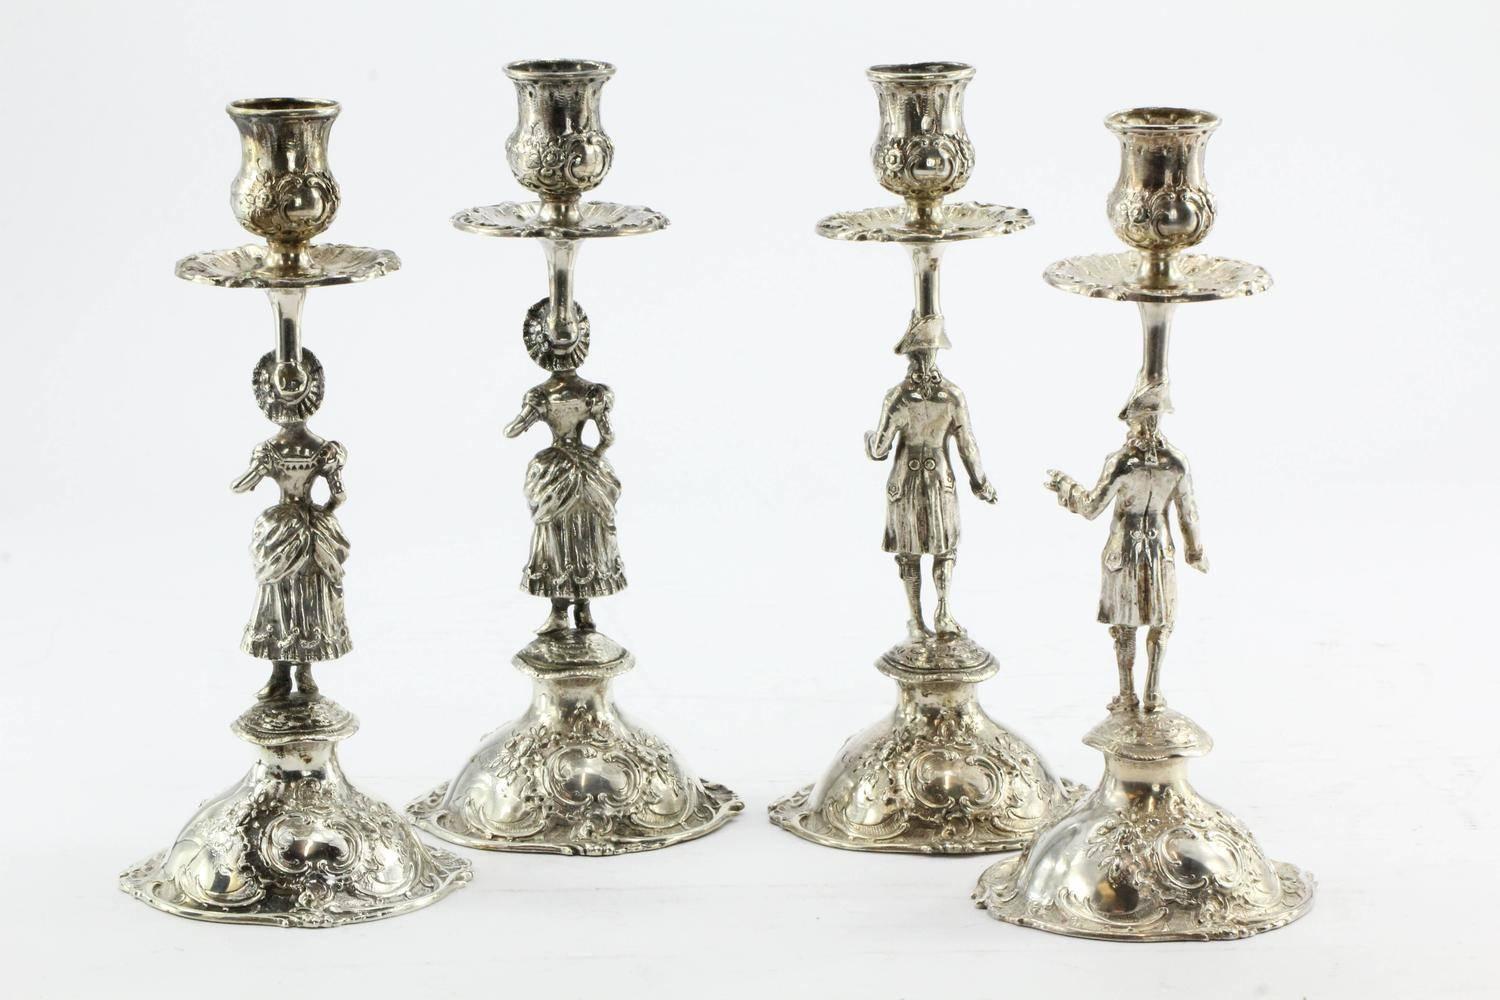 Set of four antique 800 silver Hanau Germany figural rococo candlesticks. They are in great antique estate condition and ready to use. They are each hallmarked 